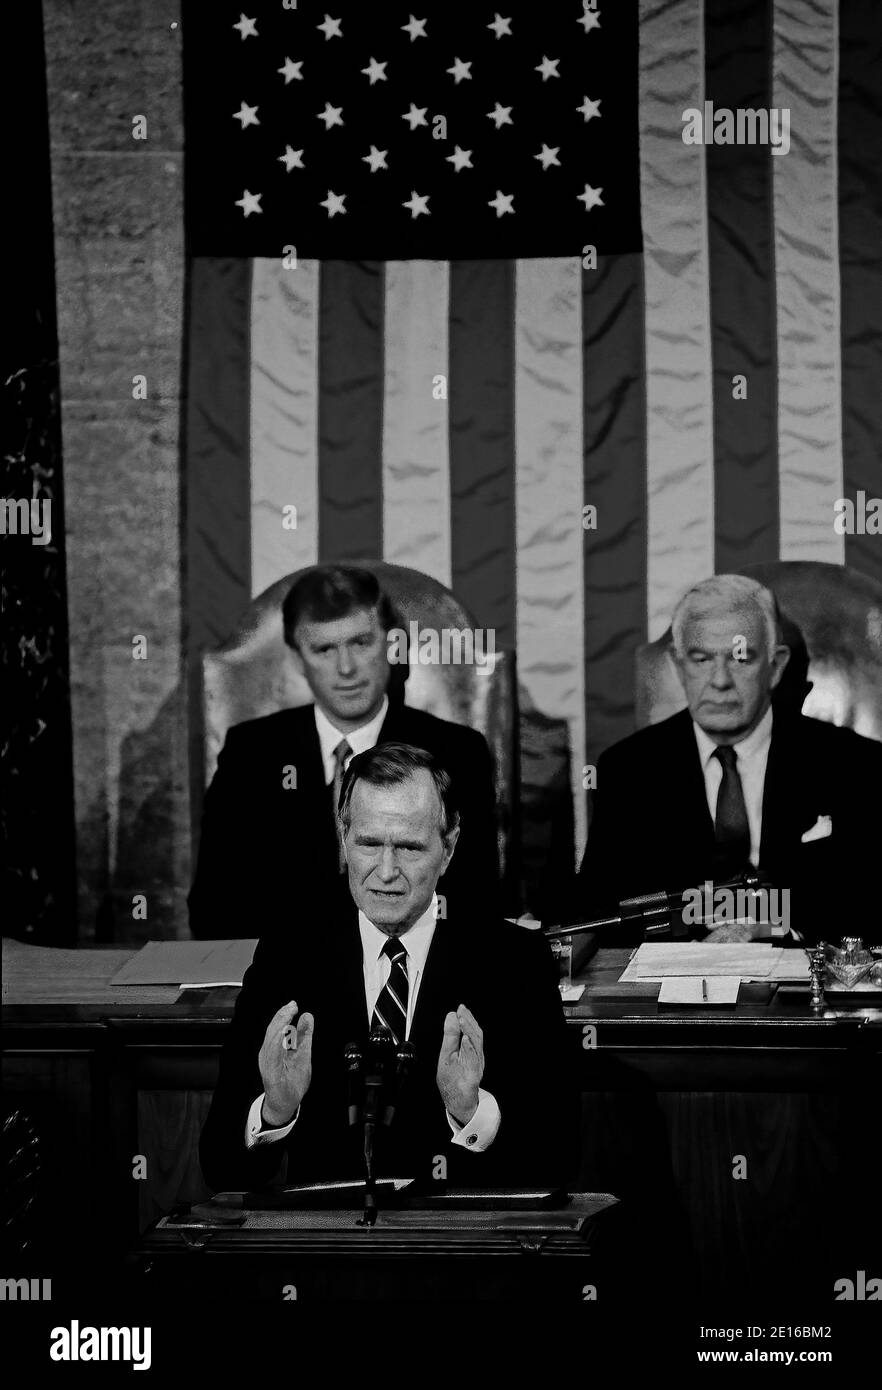 Washington, DC. USA, January 31, 1990 President George H.W. Bush delivers his address Before a Joint Session of the Congress on the State of the Union,Vice President Daniel Quayle and Speaker of the House Tom Foley are seated behind. Stock Photo